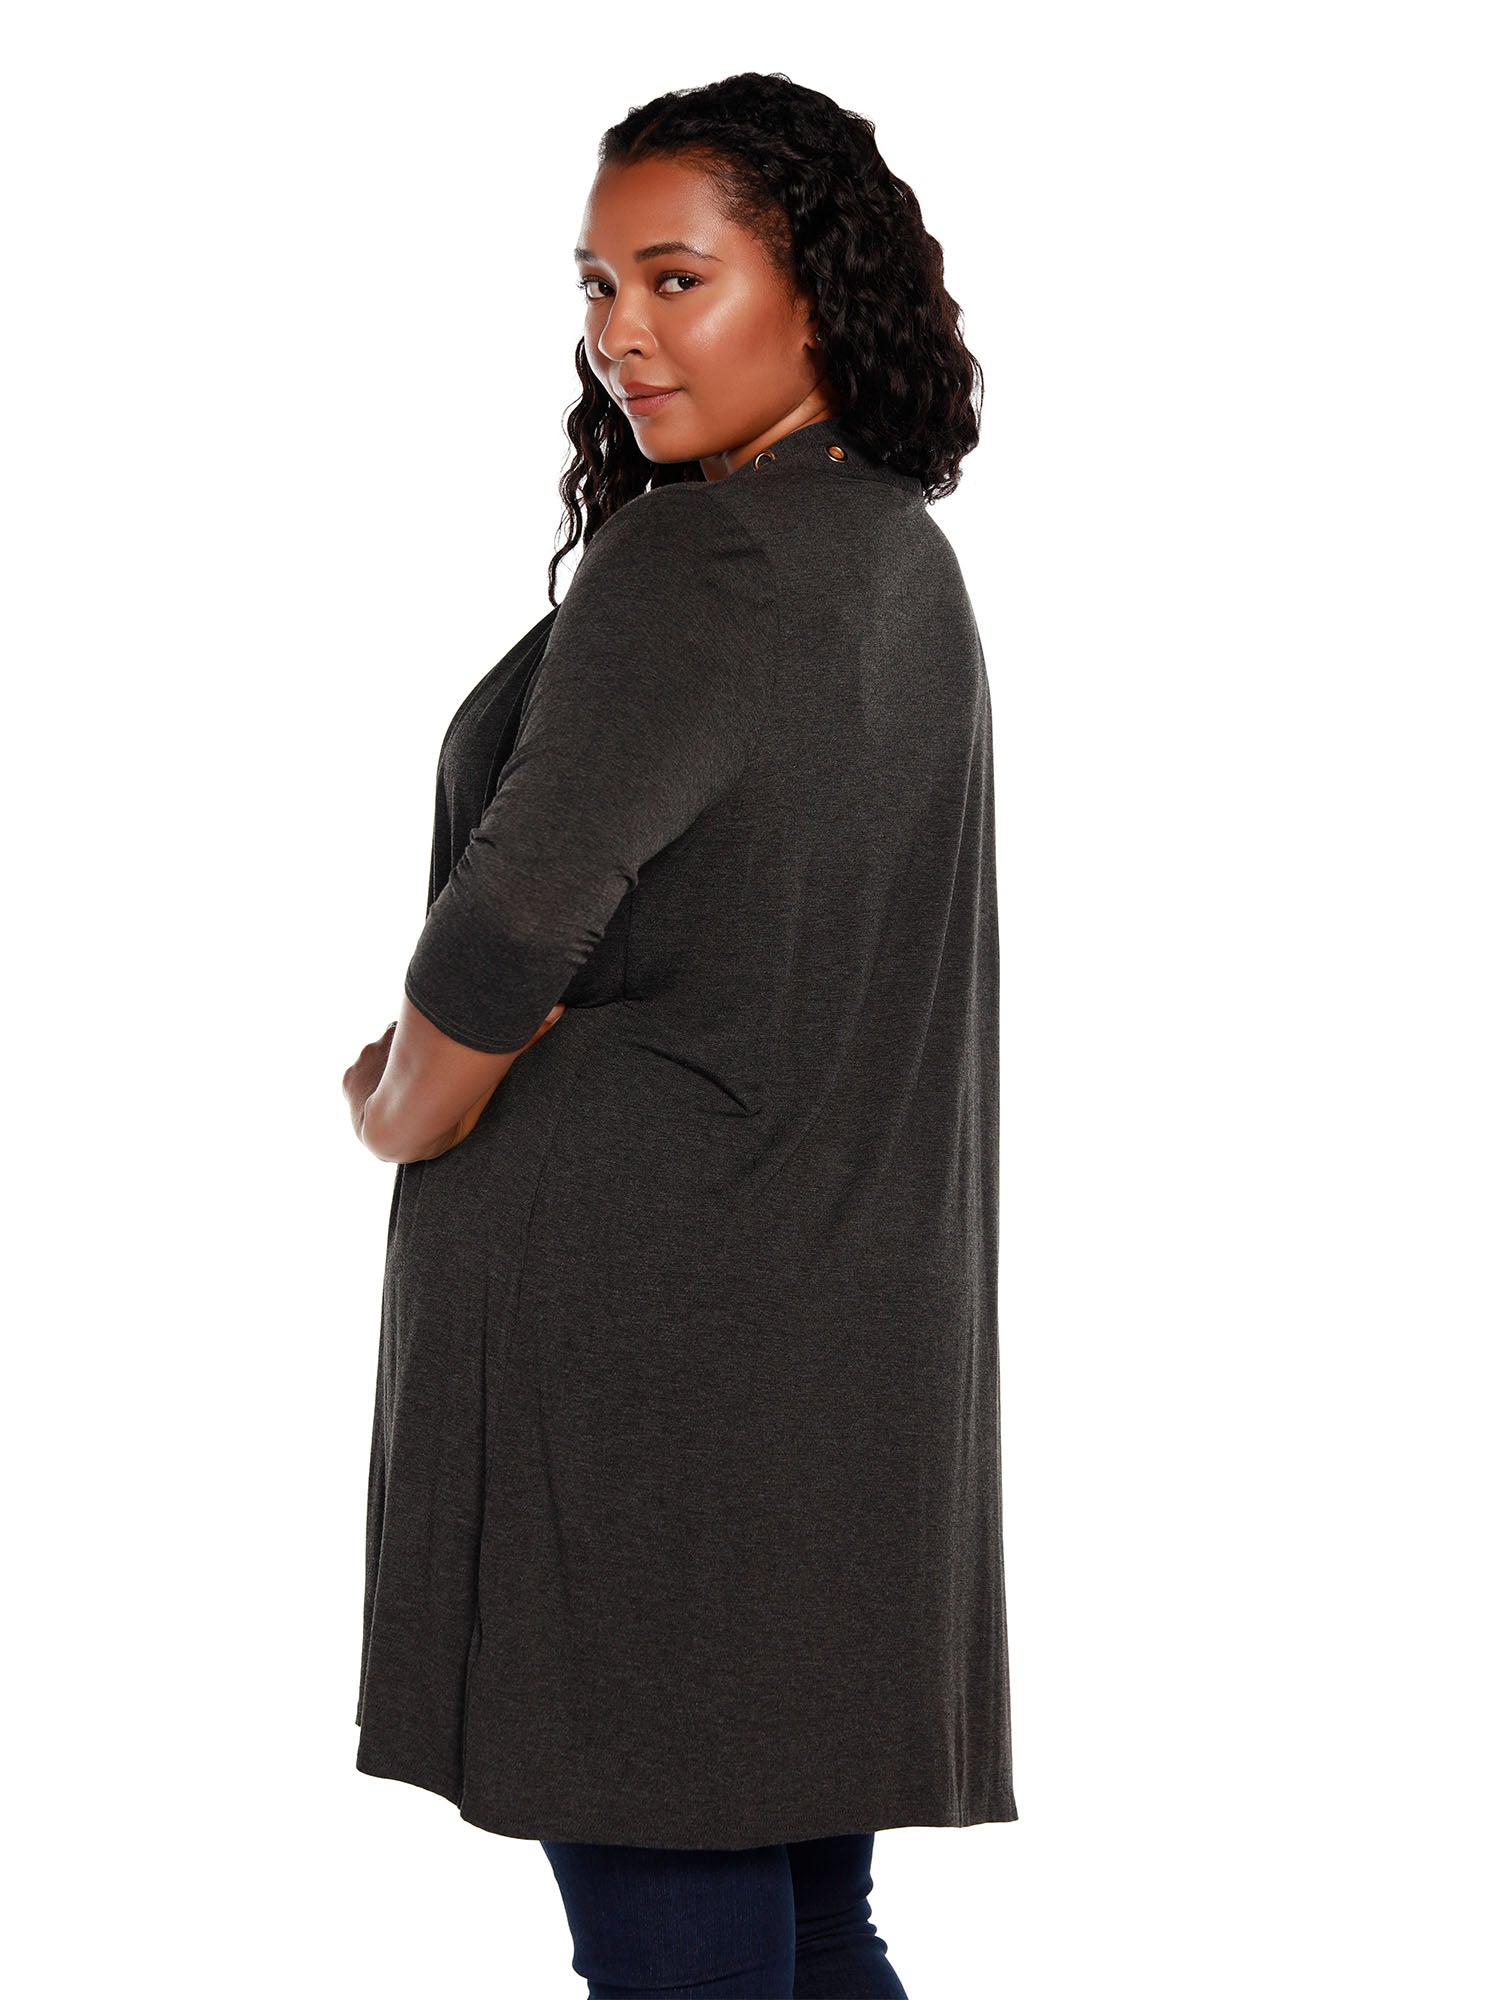 Women's 3/4 Sleeve Mid-Thigh Jersey Cardigan with Gold Grommet Trim | Curvy